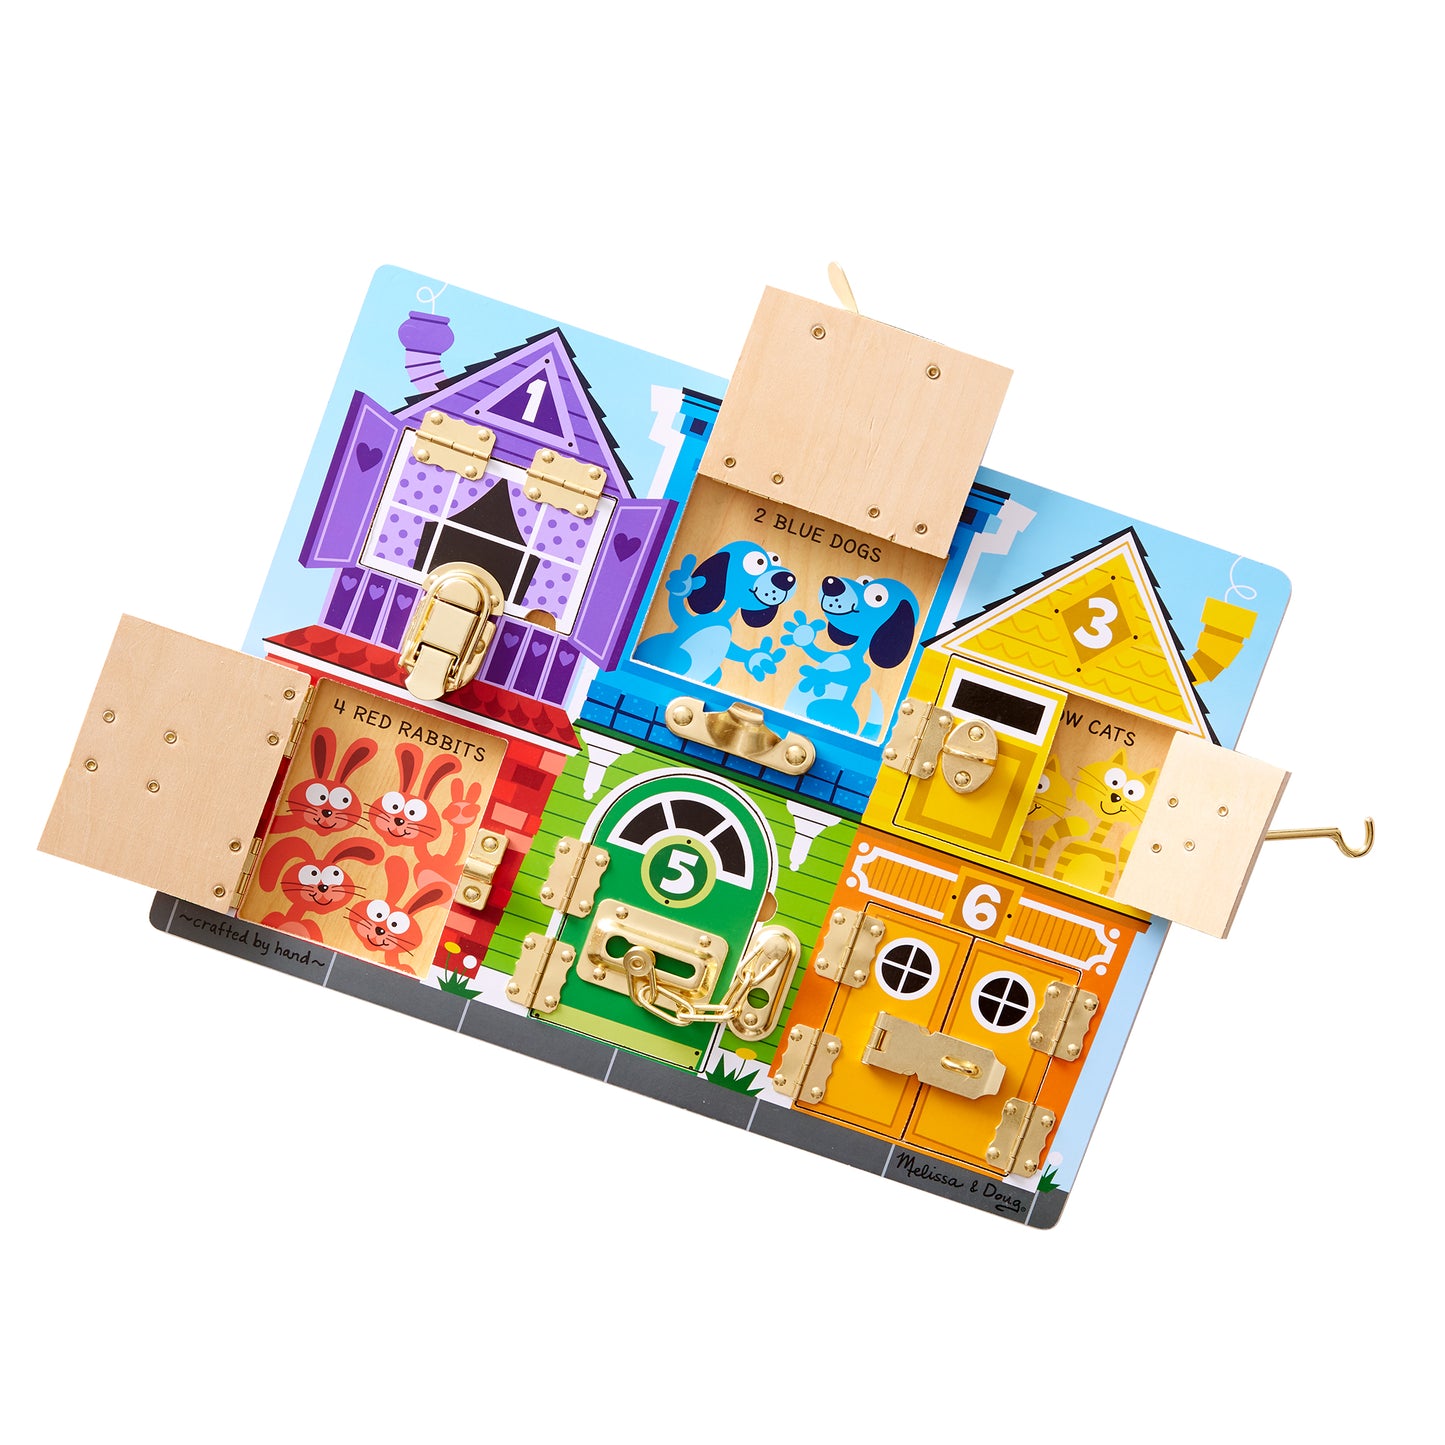 Latches Wooden Activity Board